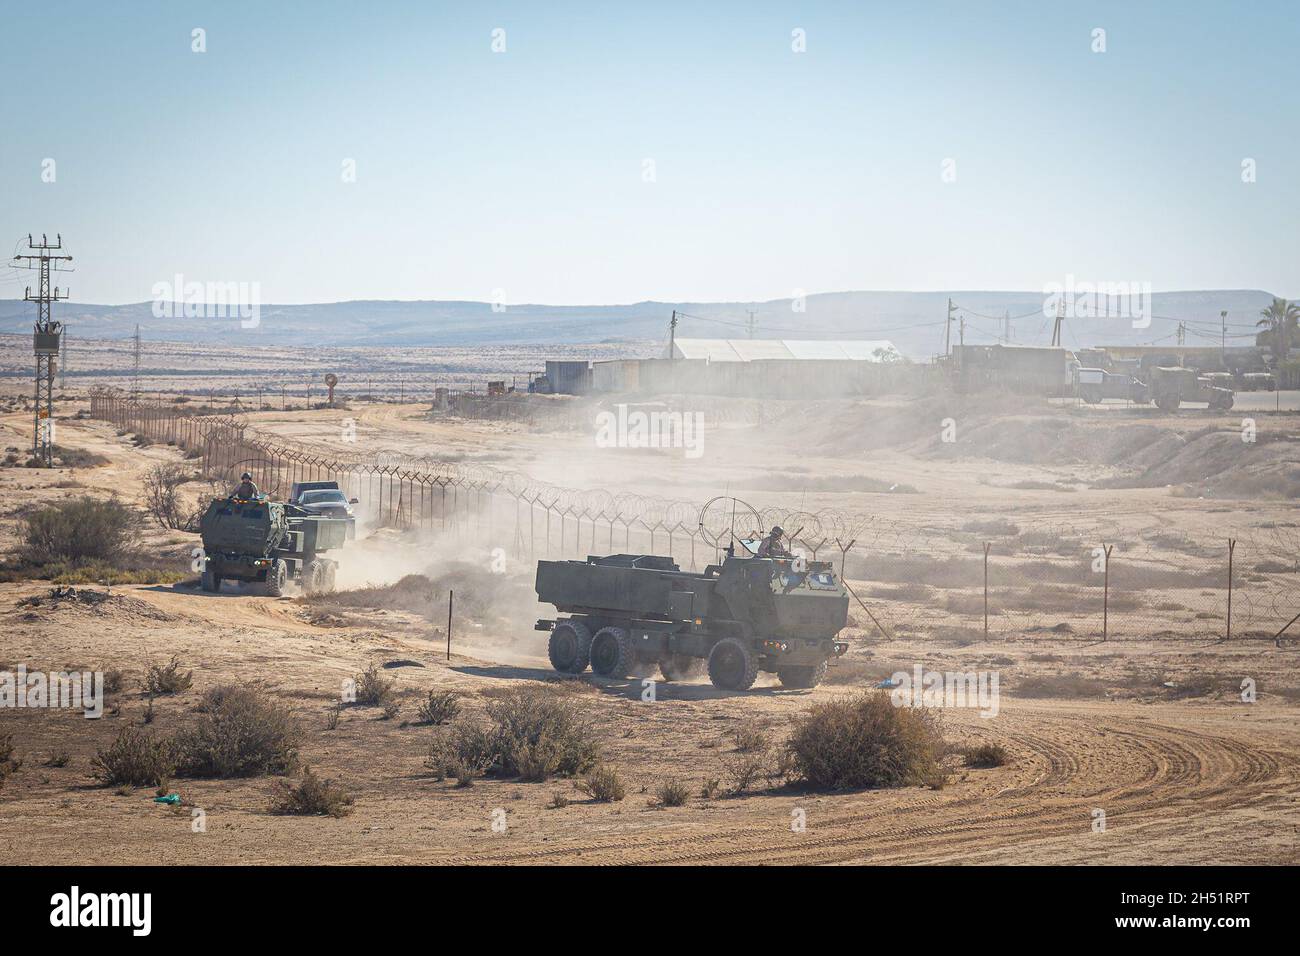 211104-M-VL720-1082 BISLAH, Israel (Nov. 4, 2021) Marines assigned to Bravo Battery, Battalion Landing Team 1/1, 11th Marine Expeditionary Unit, convoy High Mobility Artillery Rocket Systems during an Israeli interoperability exercise at Bislah Training Center, Israel, Nov. 4. This is the United States’ and Israel’s first bilateral training since Israel joined the U.S. Central Command area of responsibility and is a robust demonstration of both nations’ commitment to stability in the region. (U.S. Marine Corps photo by 1st Lt. Austin Gallegos/Released) Stock Photo